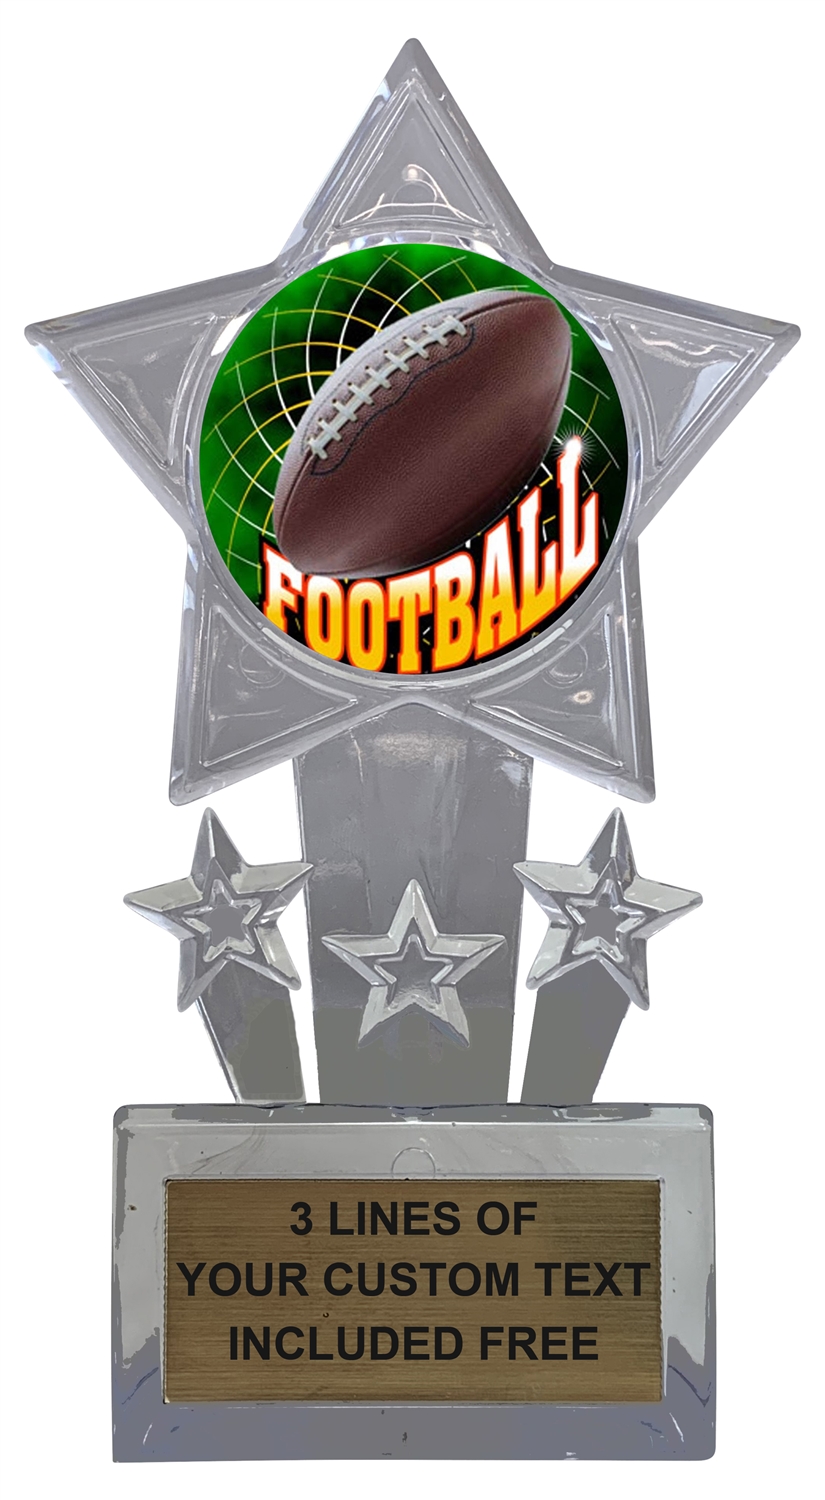 Football Trophy Cup